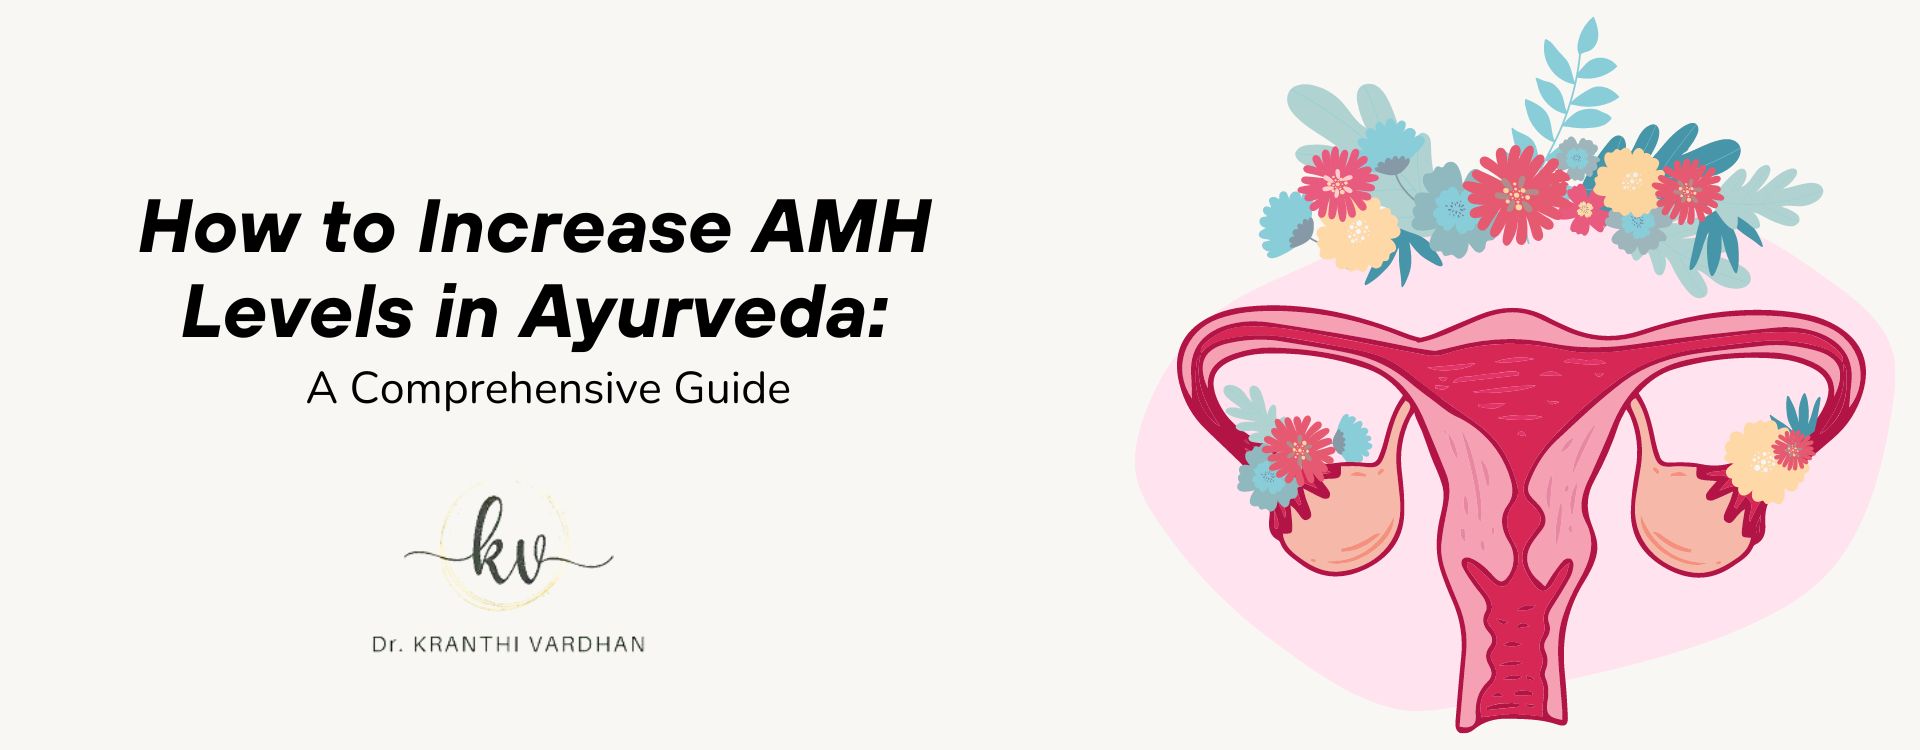 How to Increase AMH Levels in Ayurveda: A Comprehensive Guide